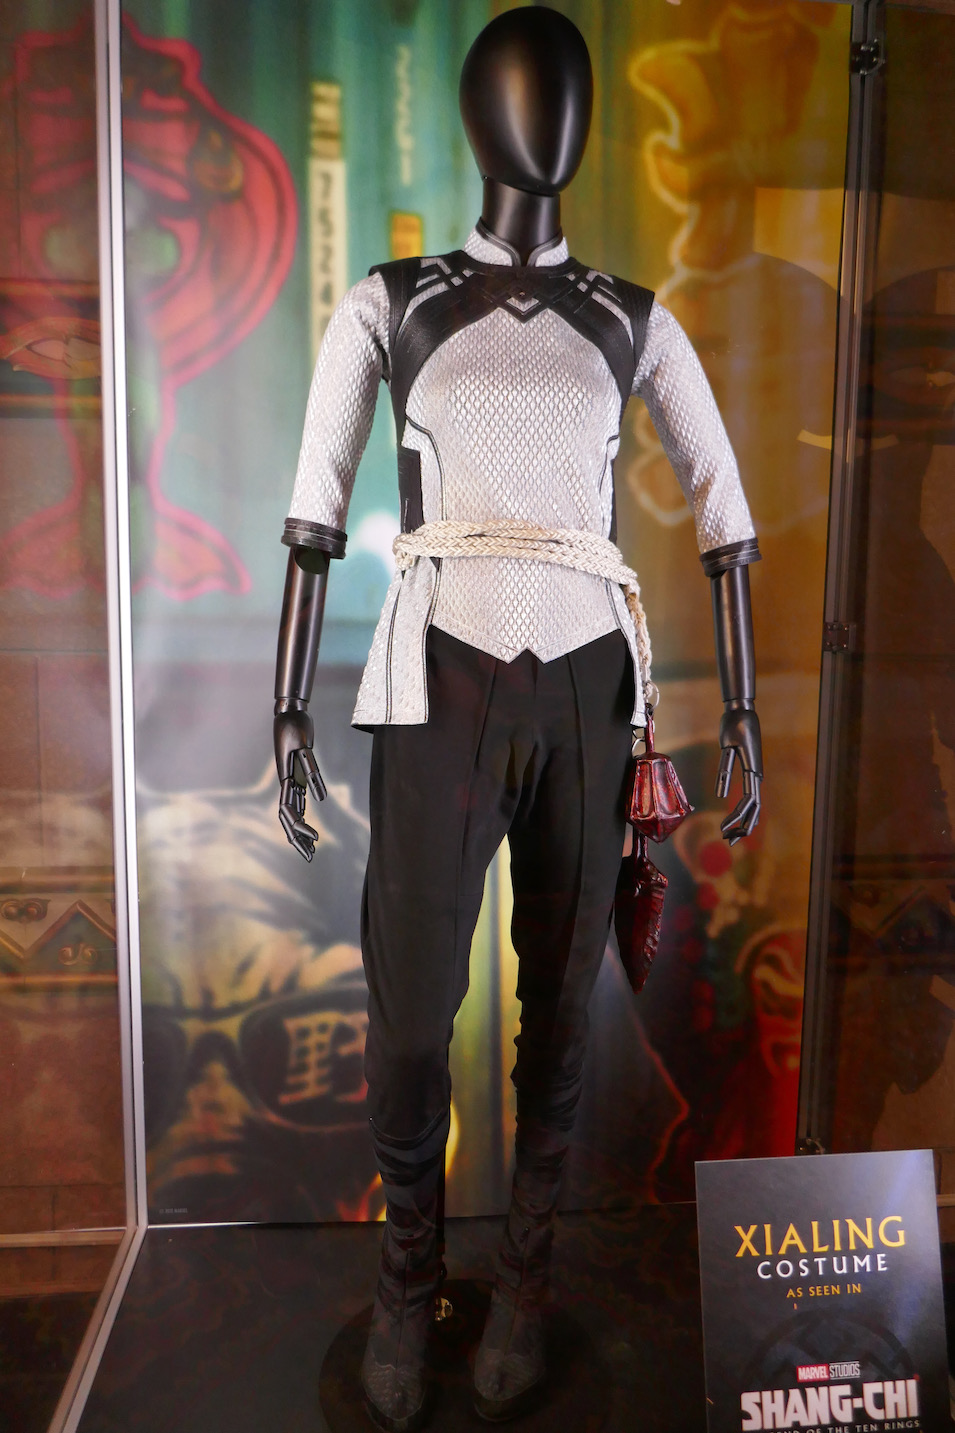 Hollywood Movie Costumes and Props: Meng'er Zhang's Xialing costume from  Shang-Chi and the Legend of the Ten Rings on display